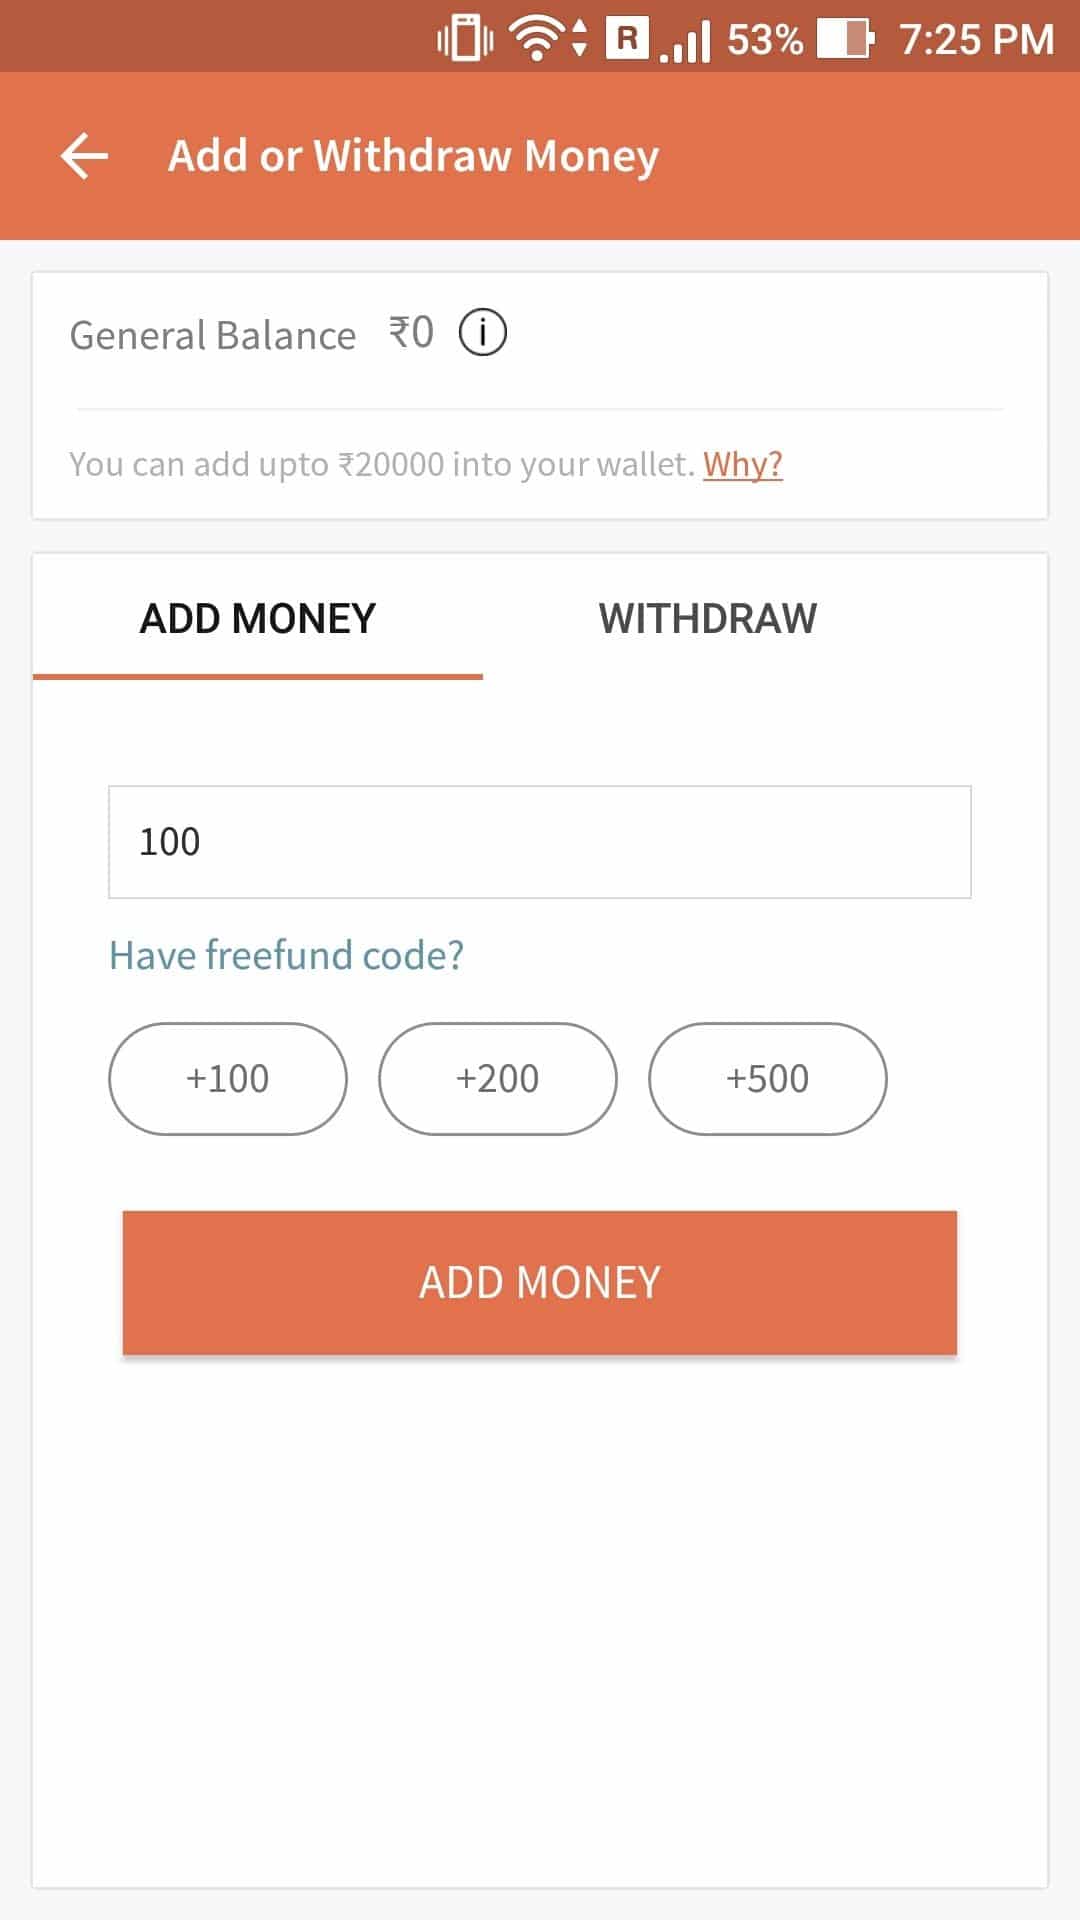 Freecharge App Review - Your Personal Digital Wallet to help you fight demonetisation! - 6